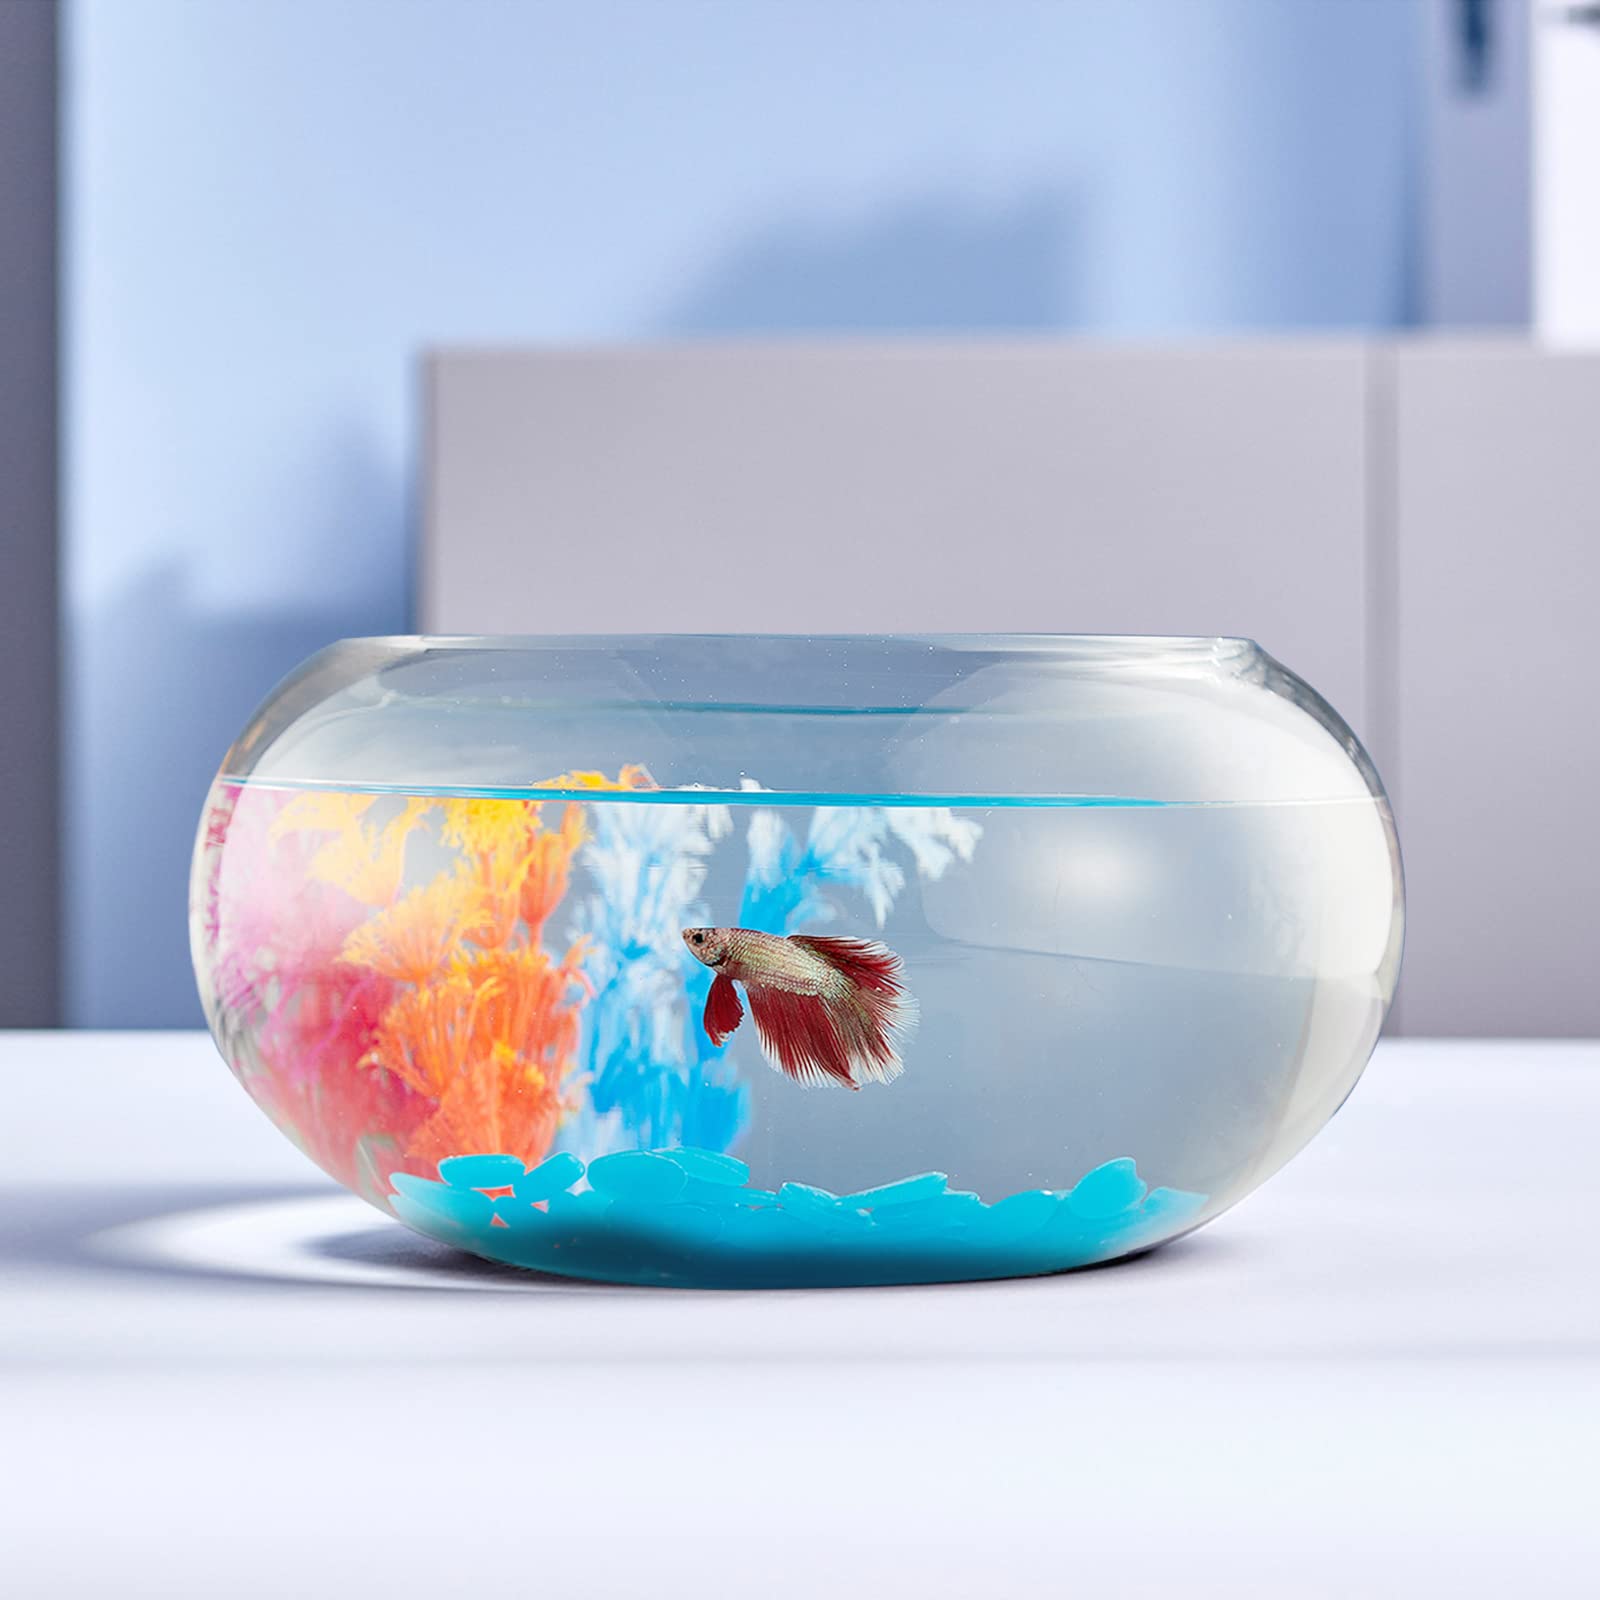 LAQUAL 2 Gallon Glass Fish Bowl with Decor, Include Fluorescent Stones &  Colorful Plastic Trees, High